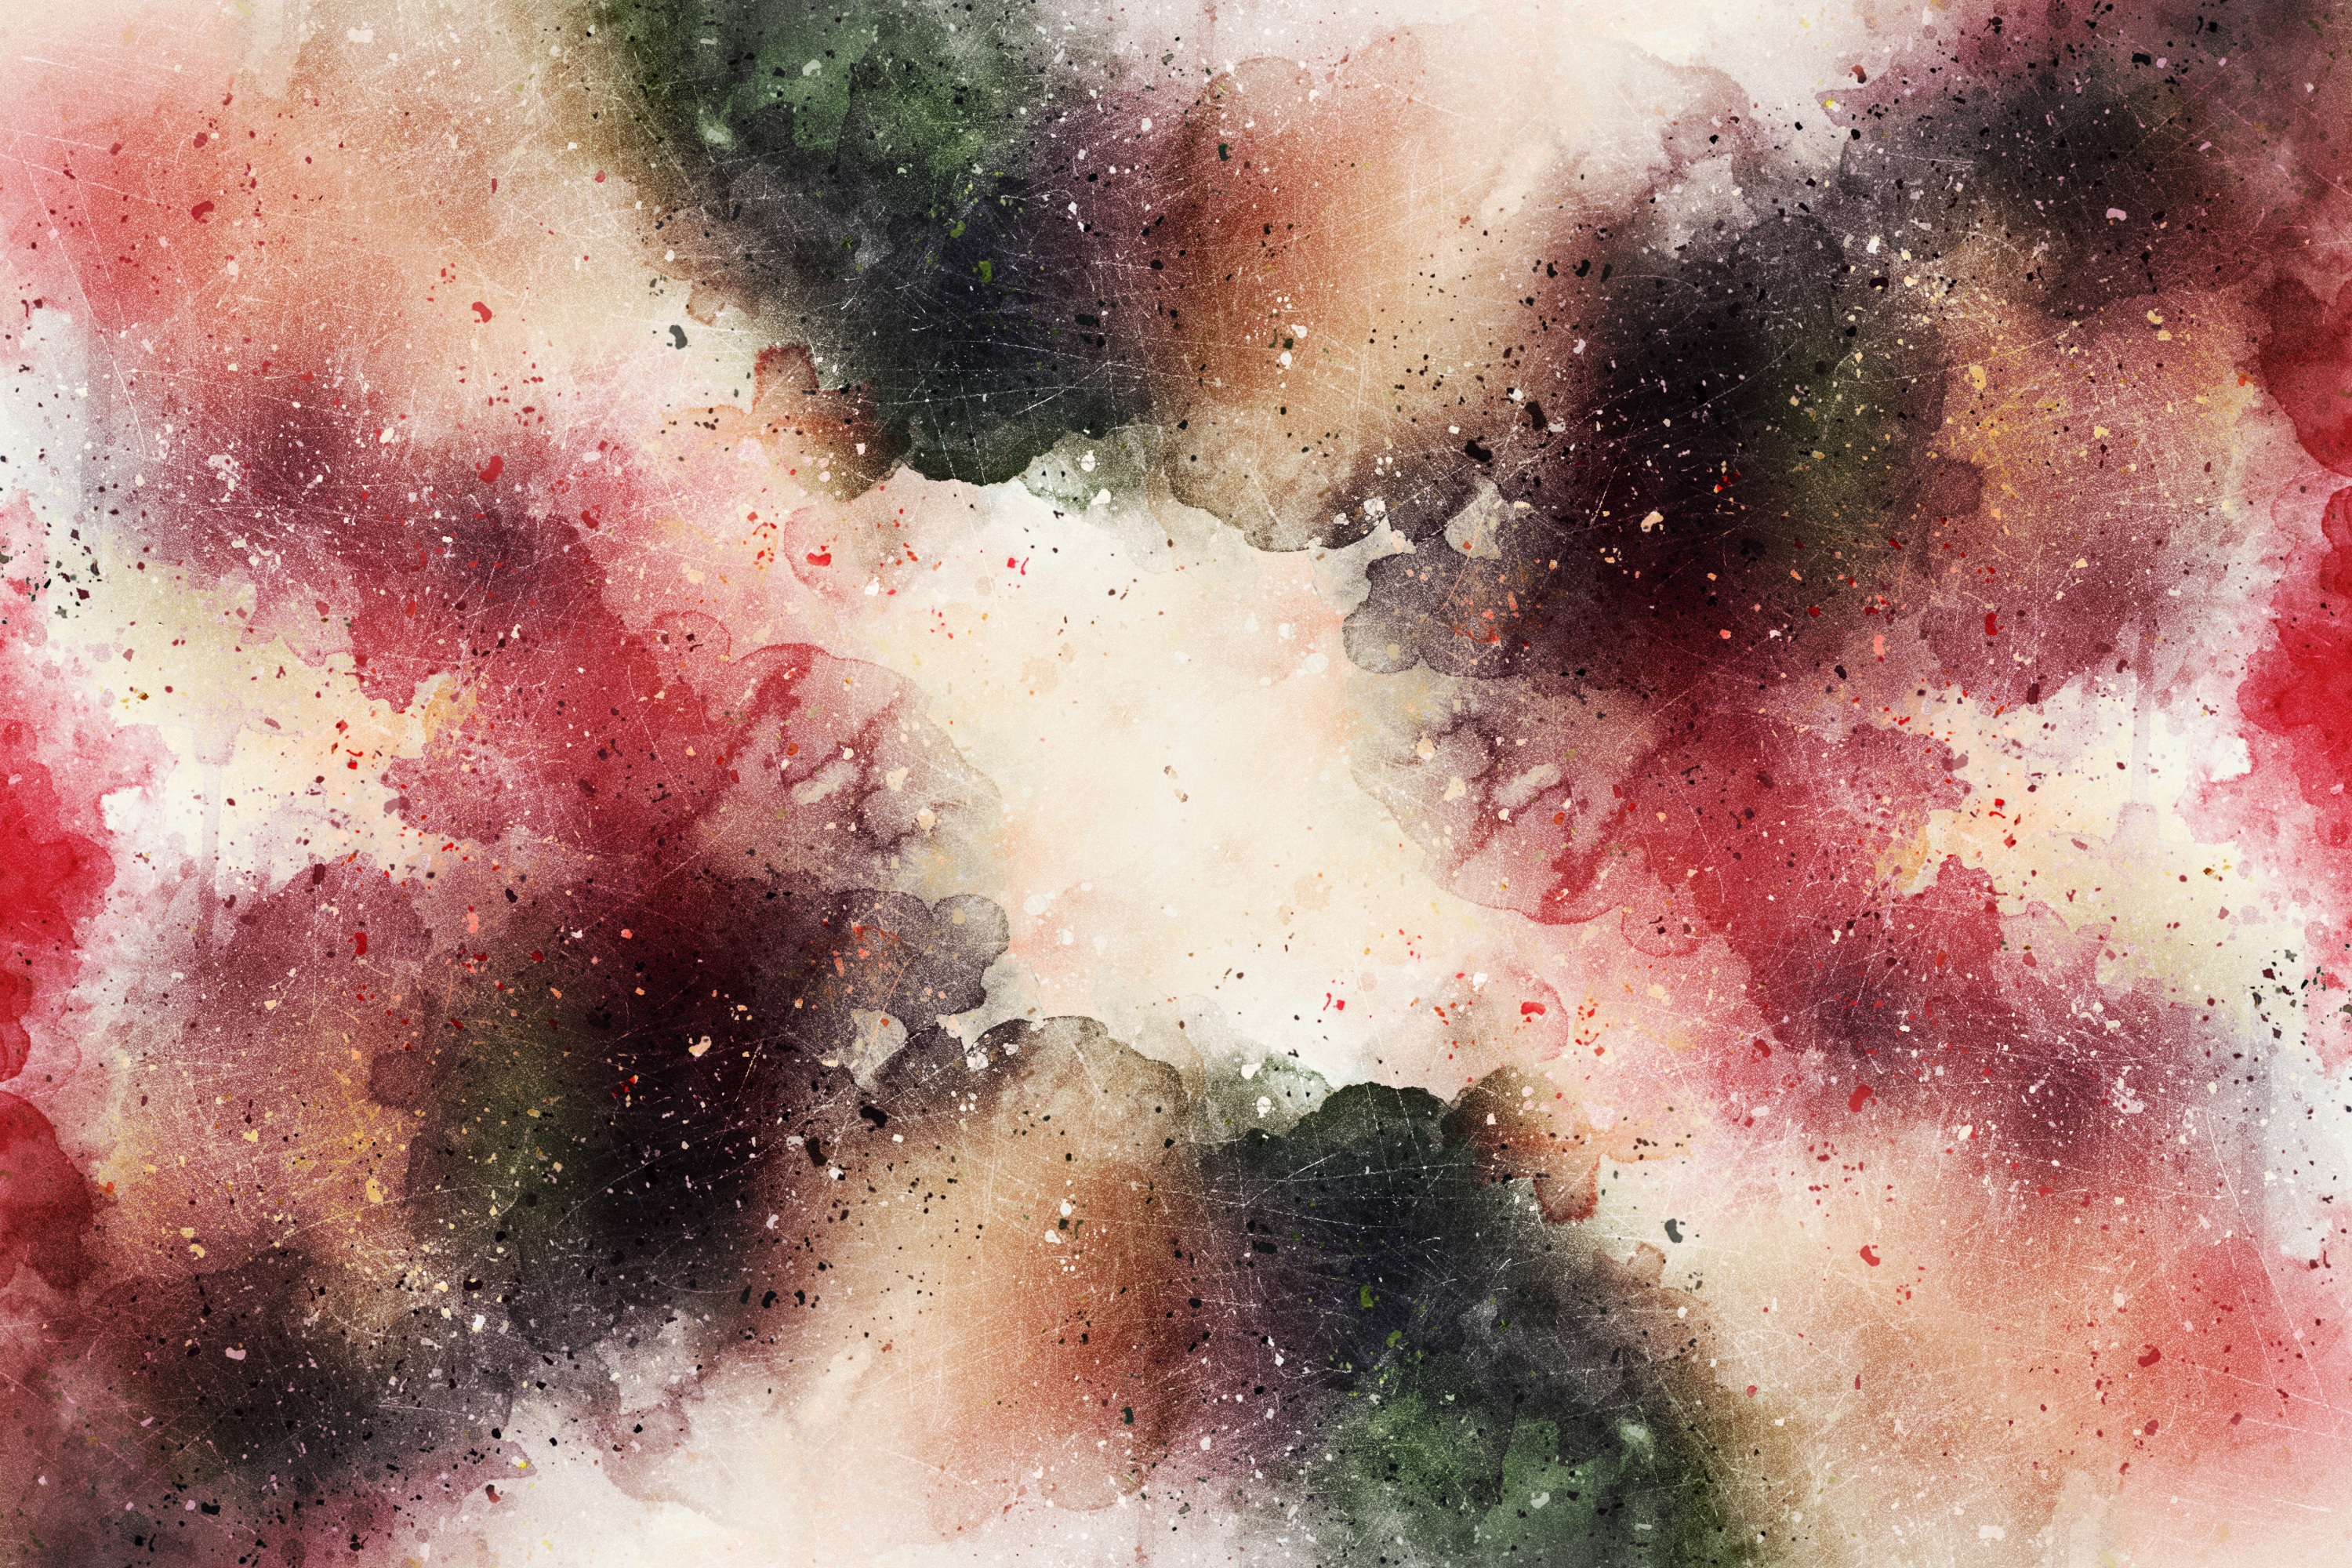 stains, spots, abstract, watercolor